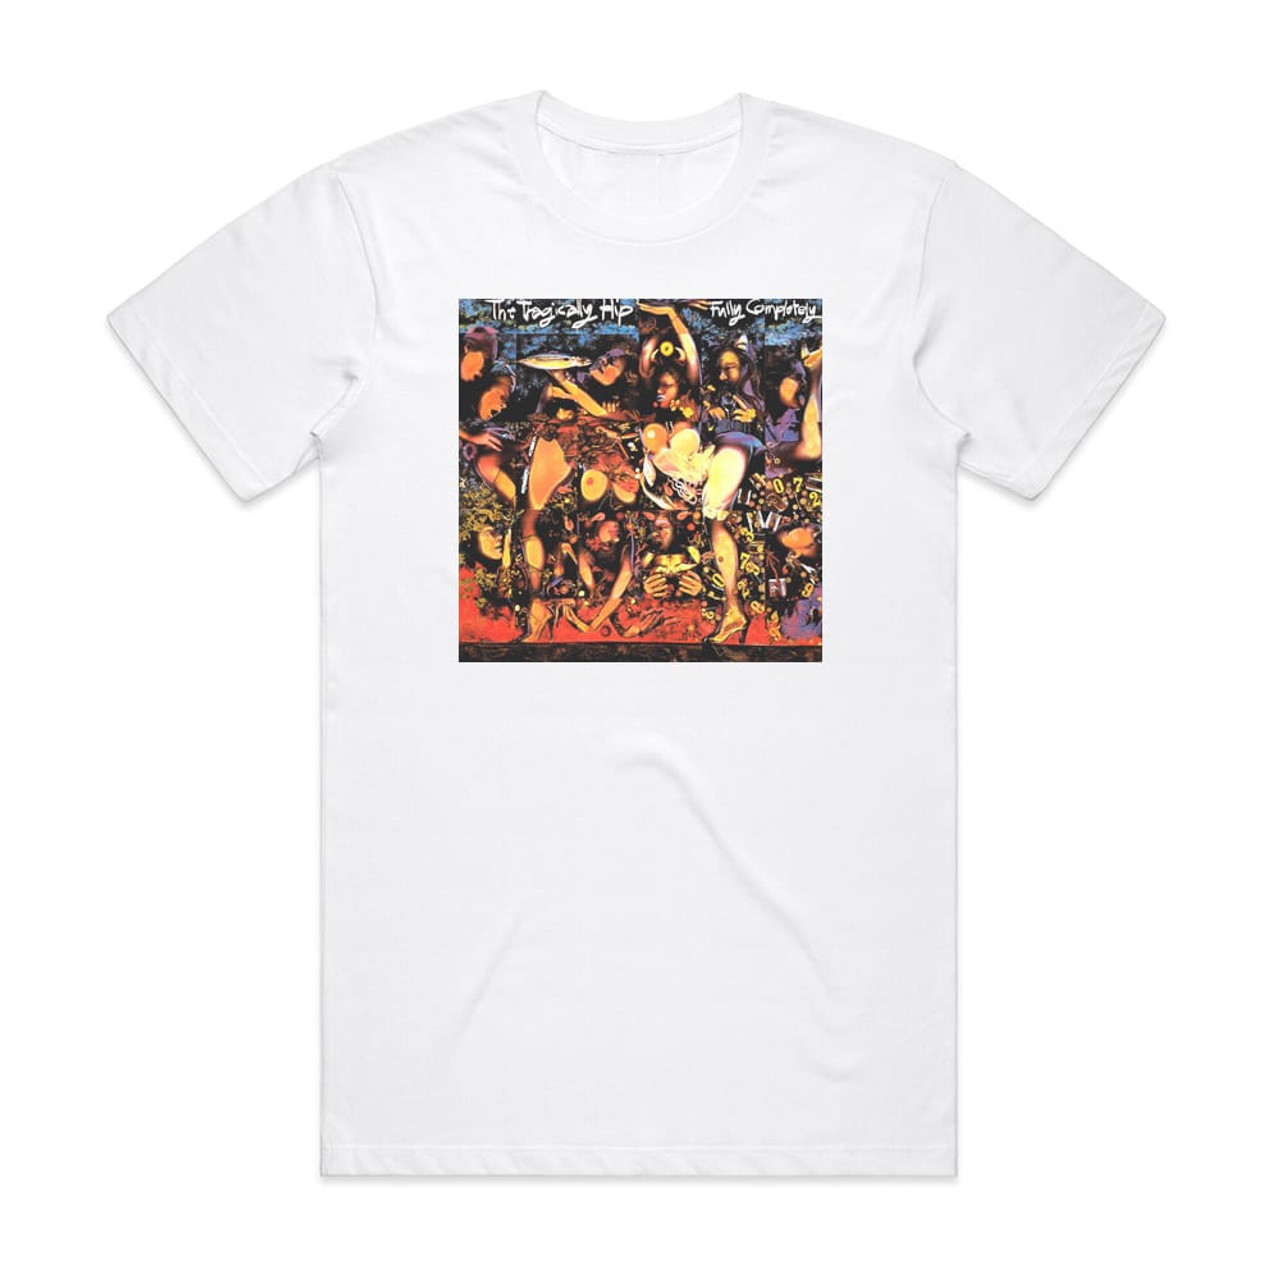 The Tragically Hip Fully Completely Album Cover T-Shirt White